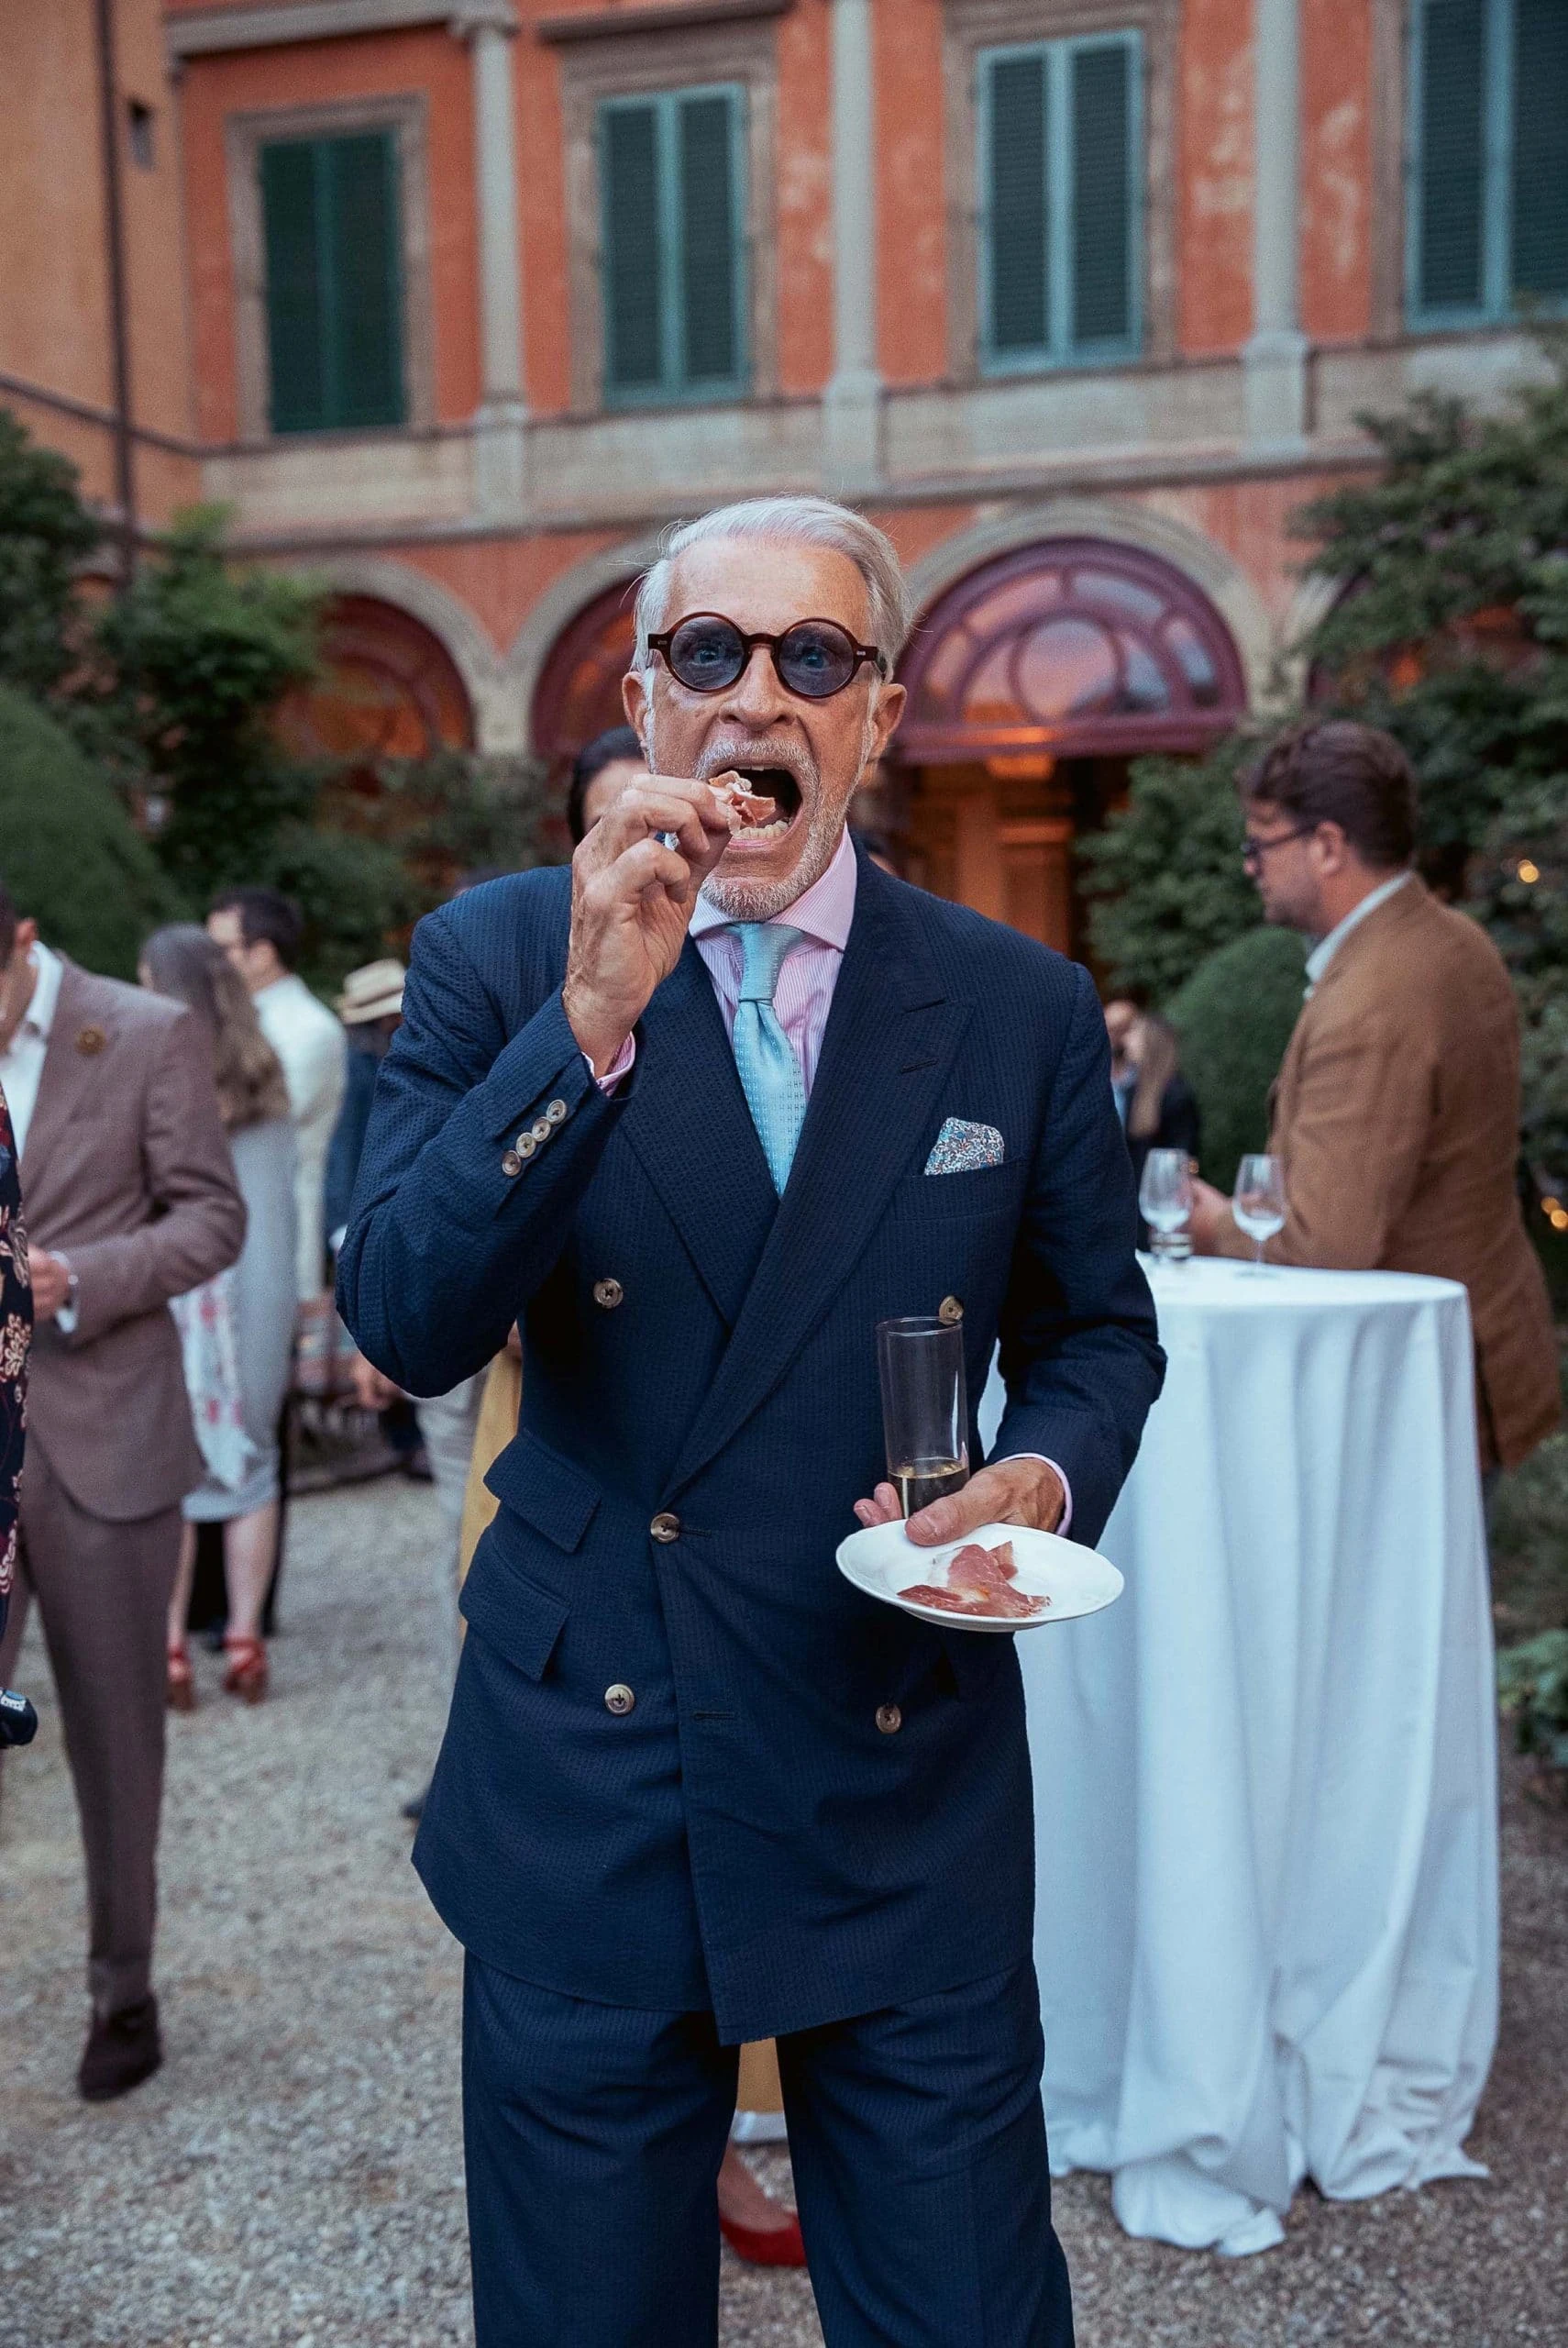 Henrik Hjerl spotted wearing a navy blue suit at the Plaza Uomo party